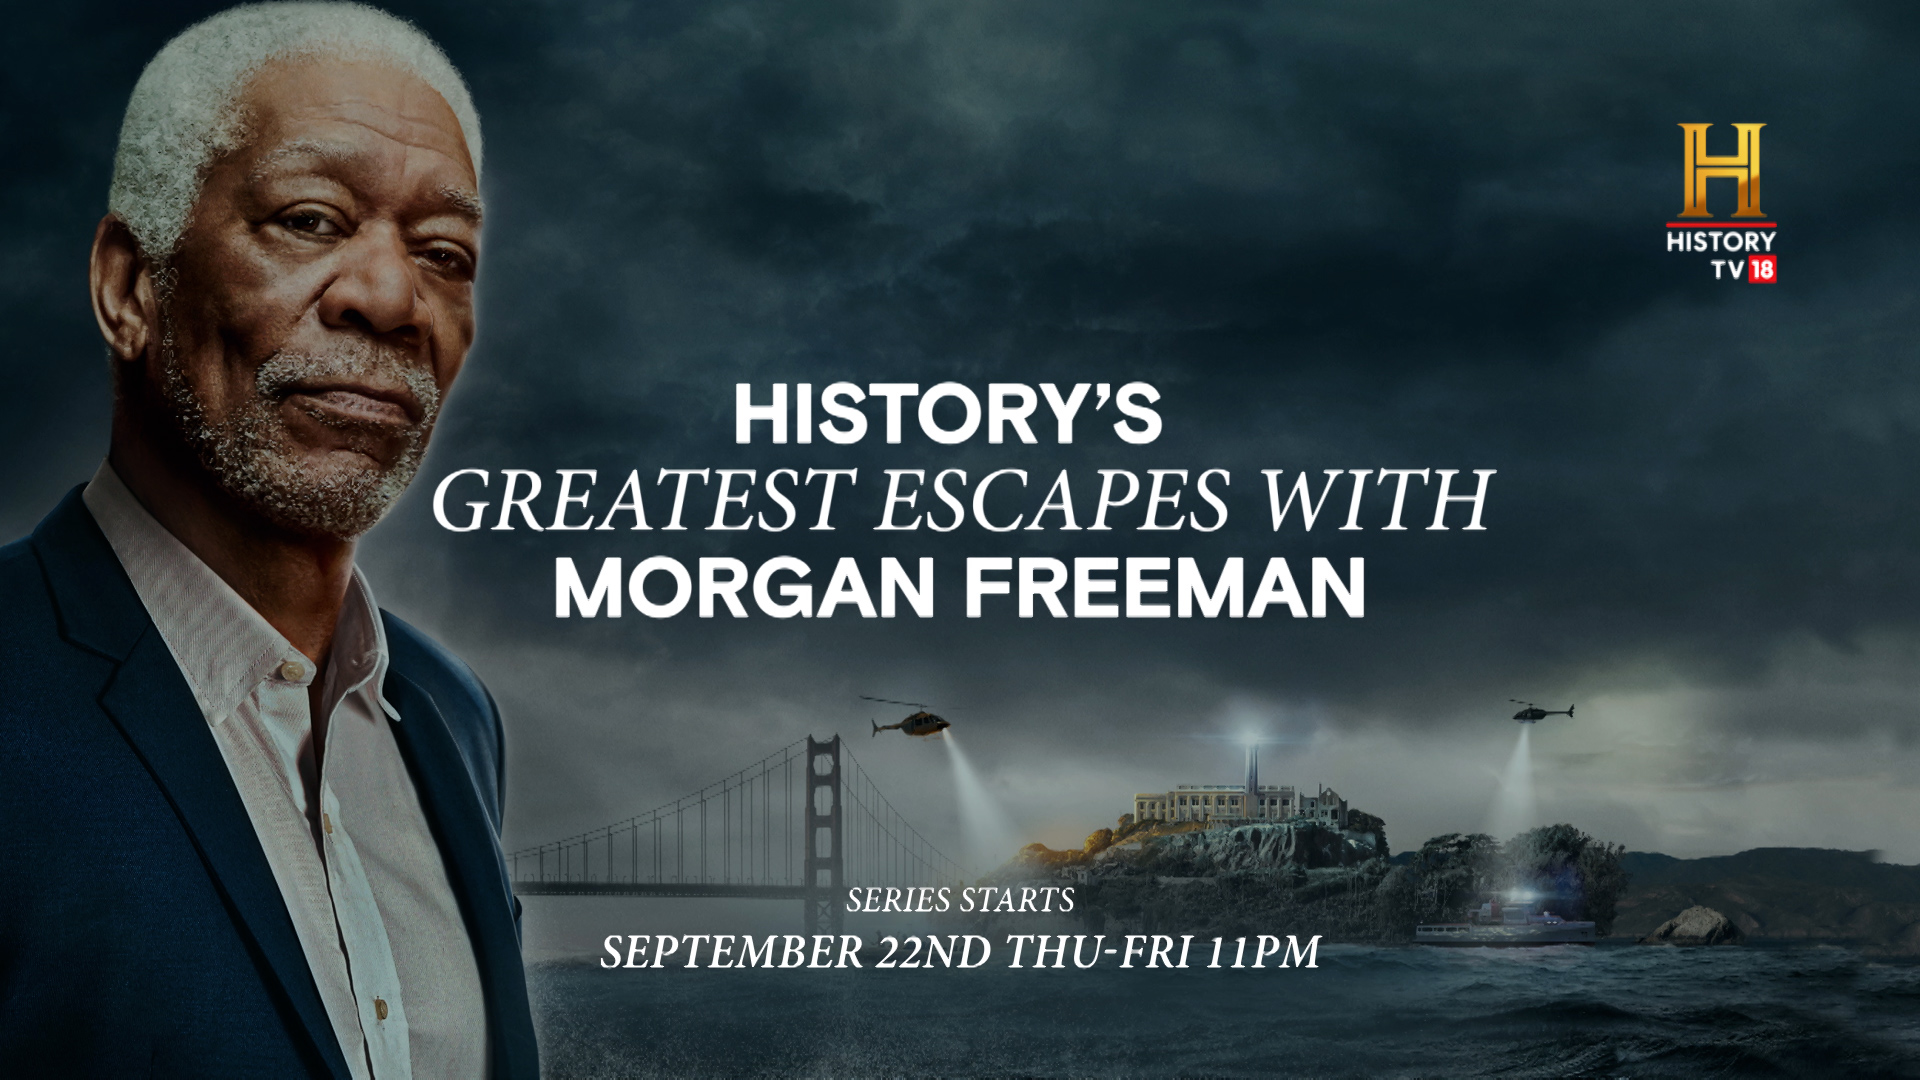 Break Out of the Monotony with History TV18’s Latest Series - History’s Greatest Escapes with Morgan Freeman, which Showcases some of the Most Daring Jailbreaks. Premieres 22nd September 2022.